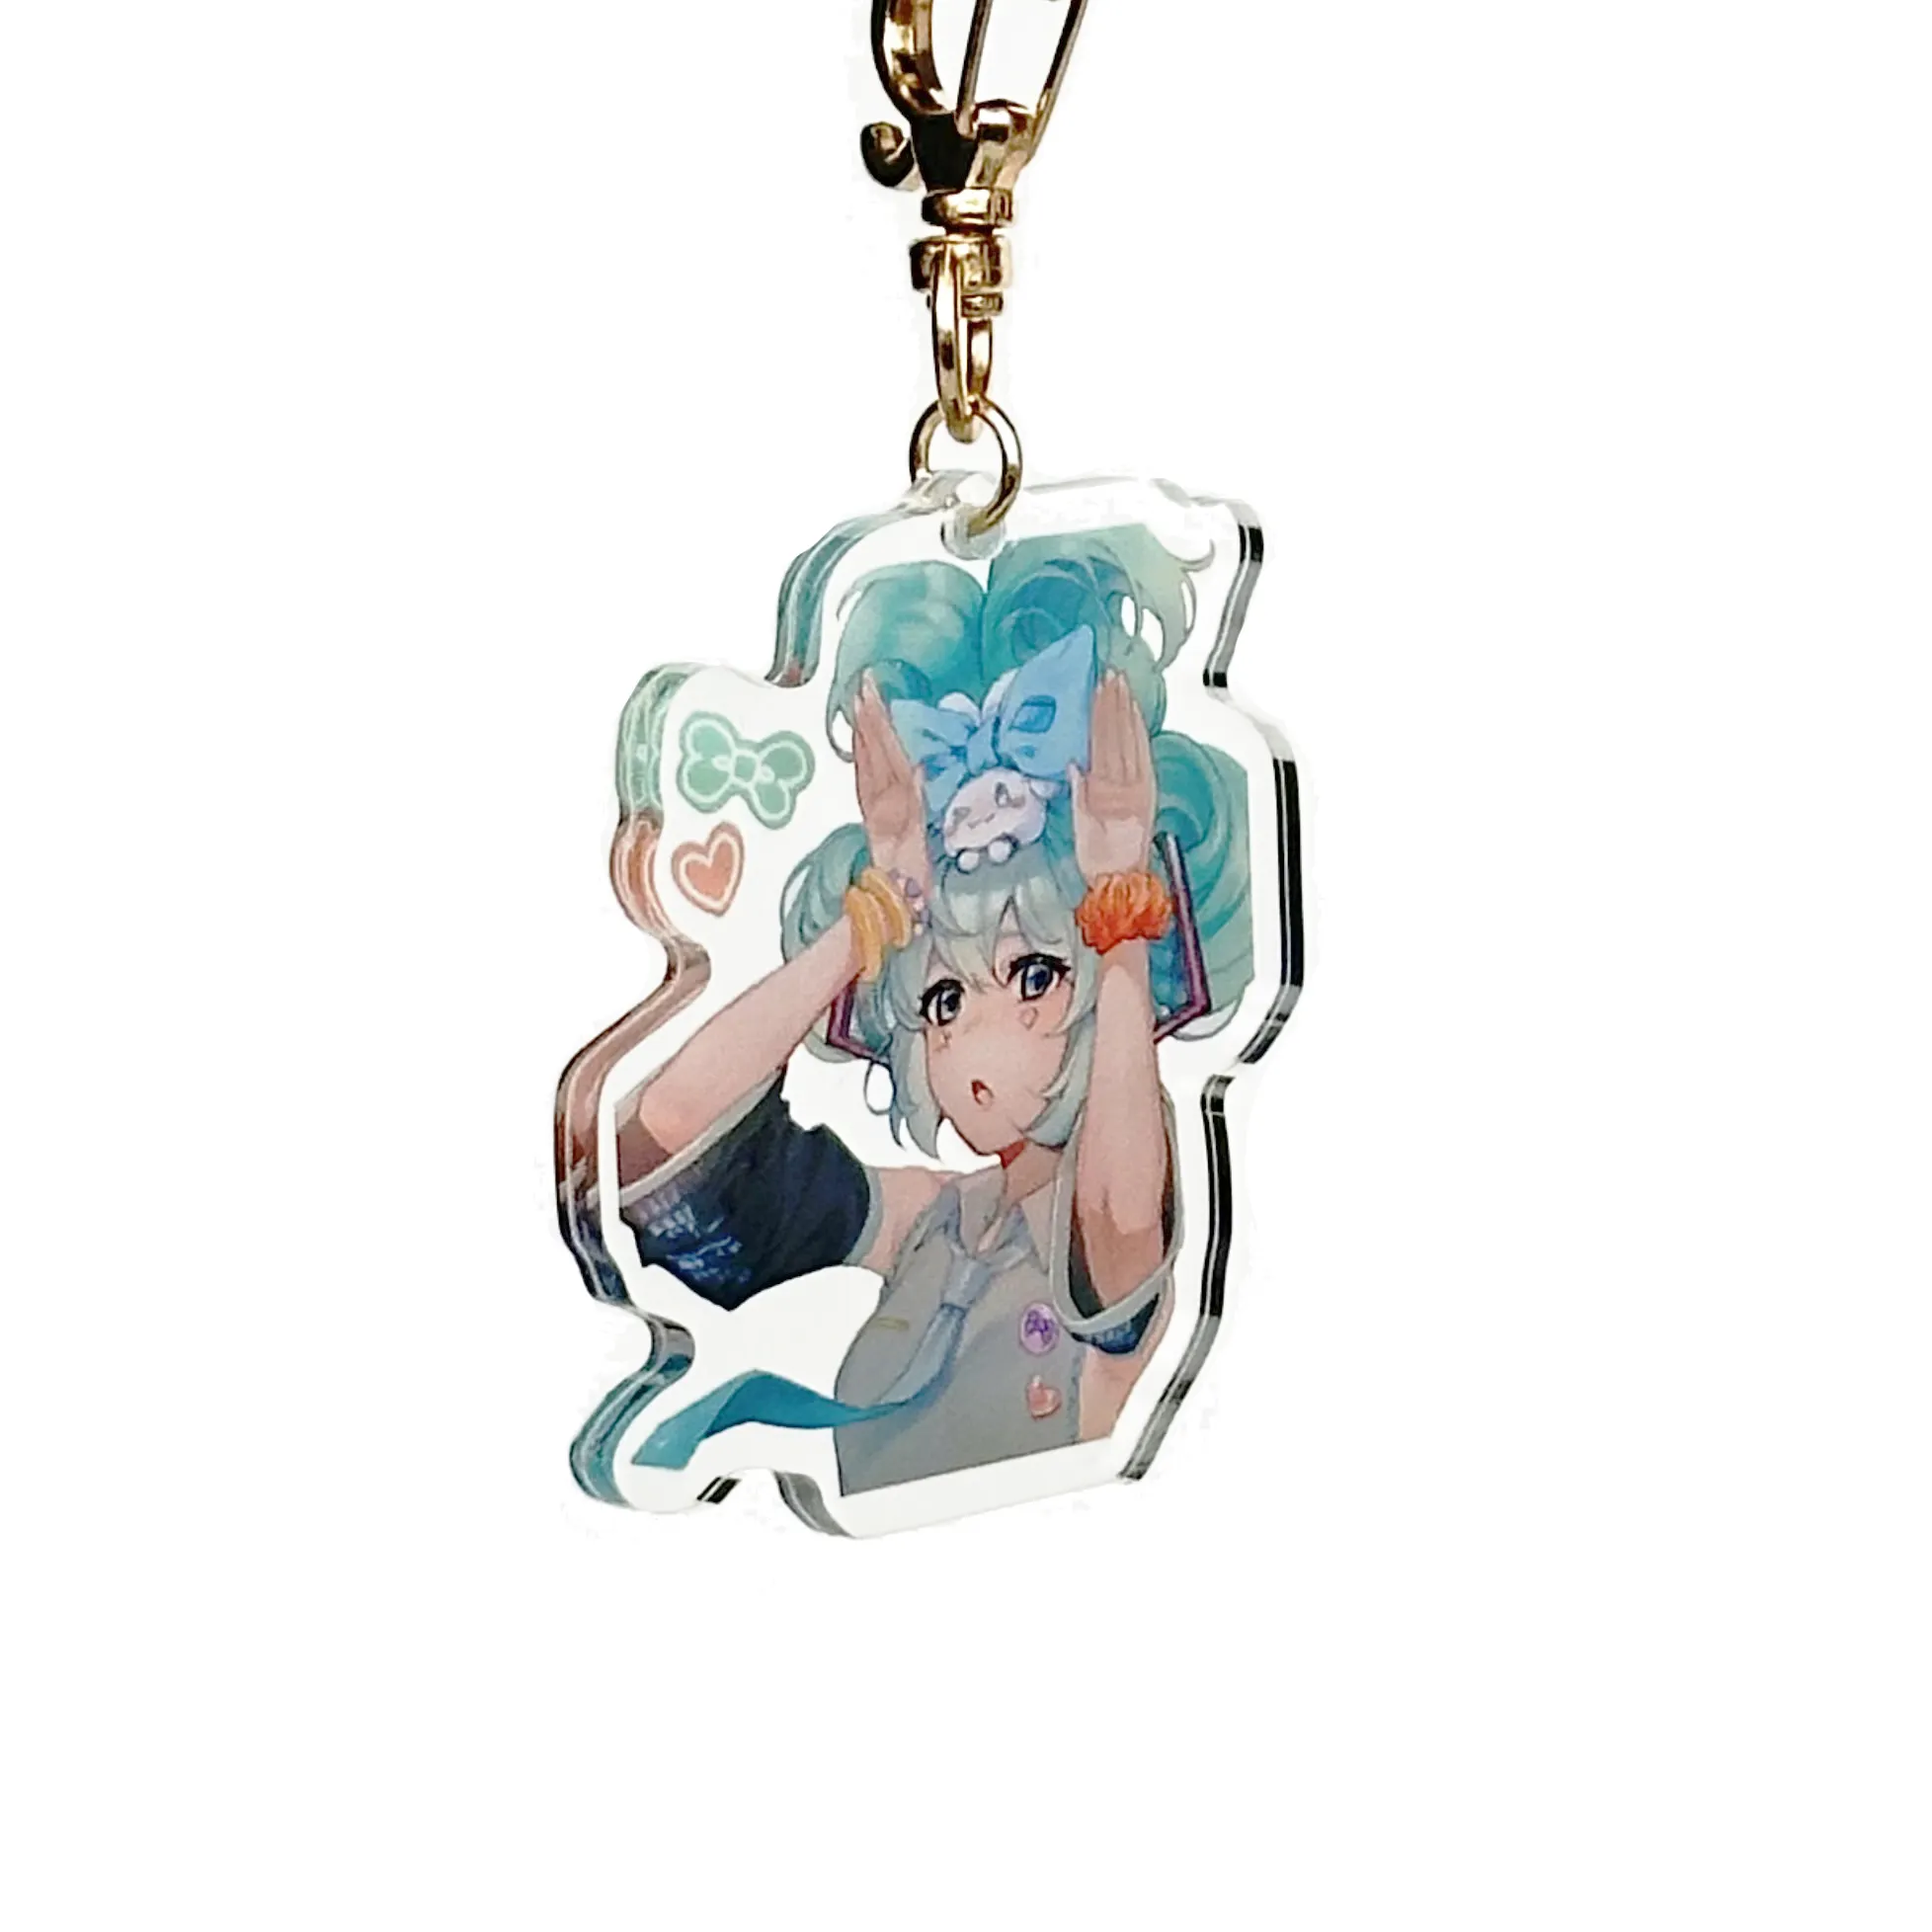 Transparent Acrylic Keychain with Stainless Steel Custom Clear Animation Cartoon Printing Make Your Own Unique Keychain